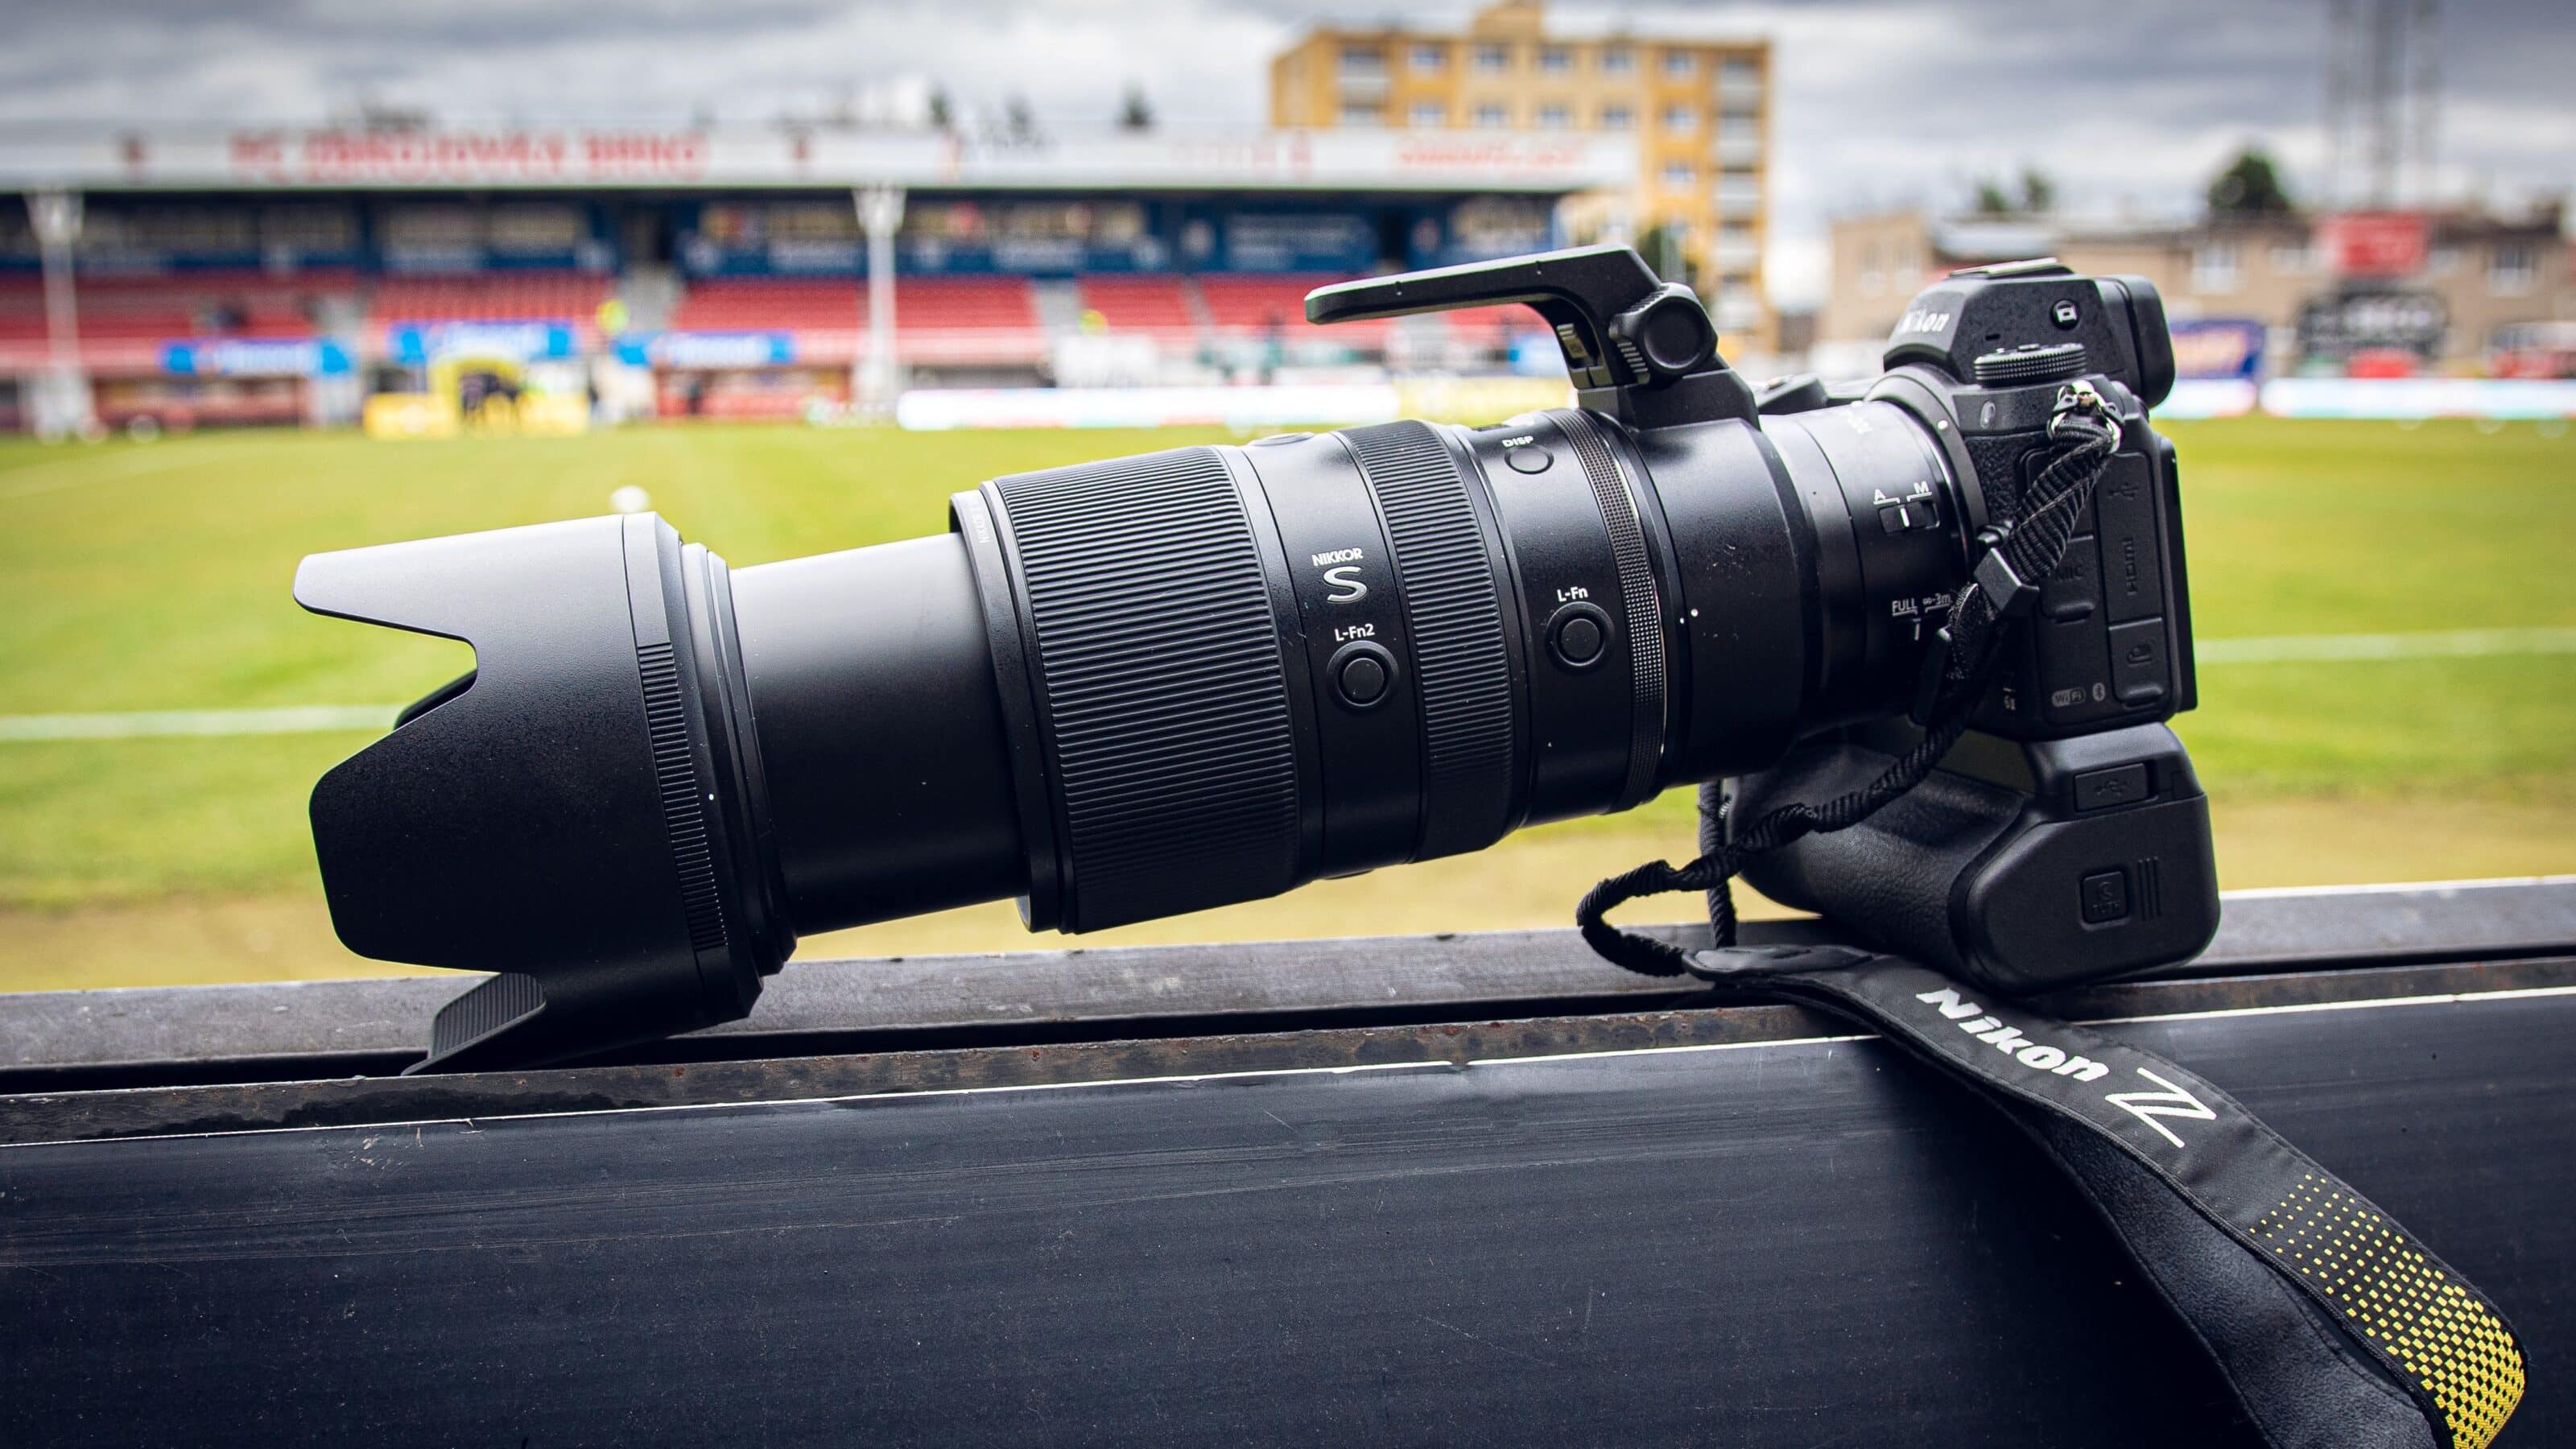 Soccer Game through the Camera Viewfinder & Telephoto Lens Review